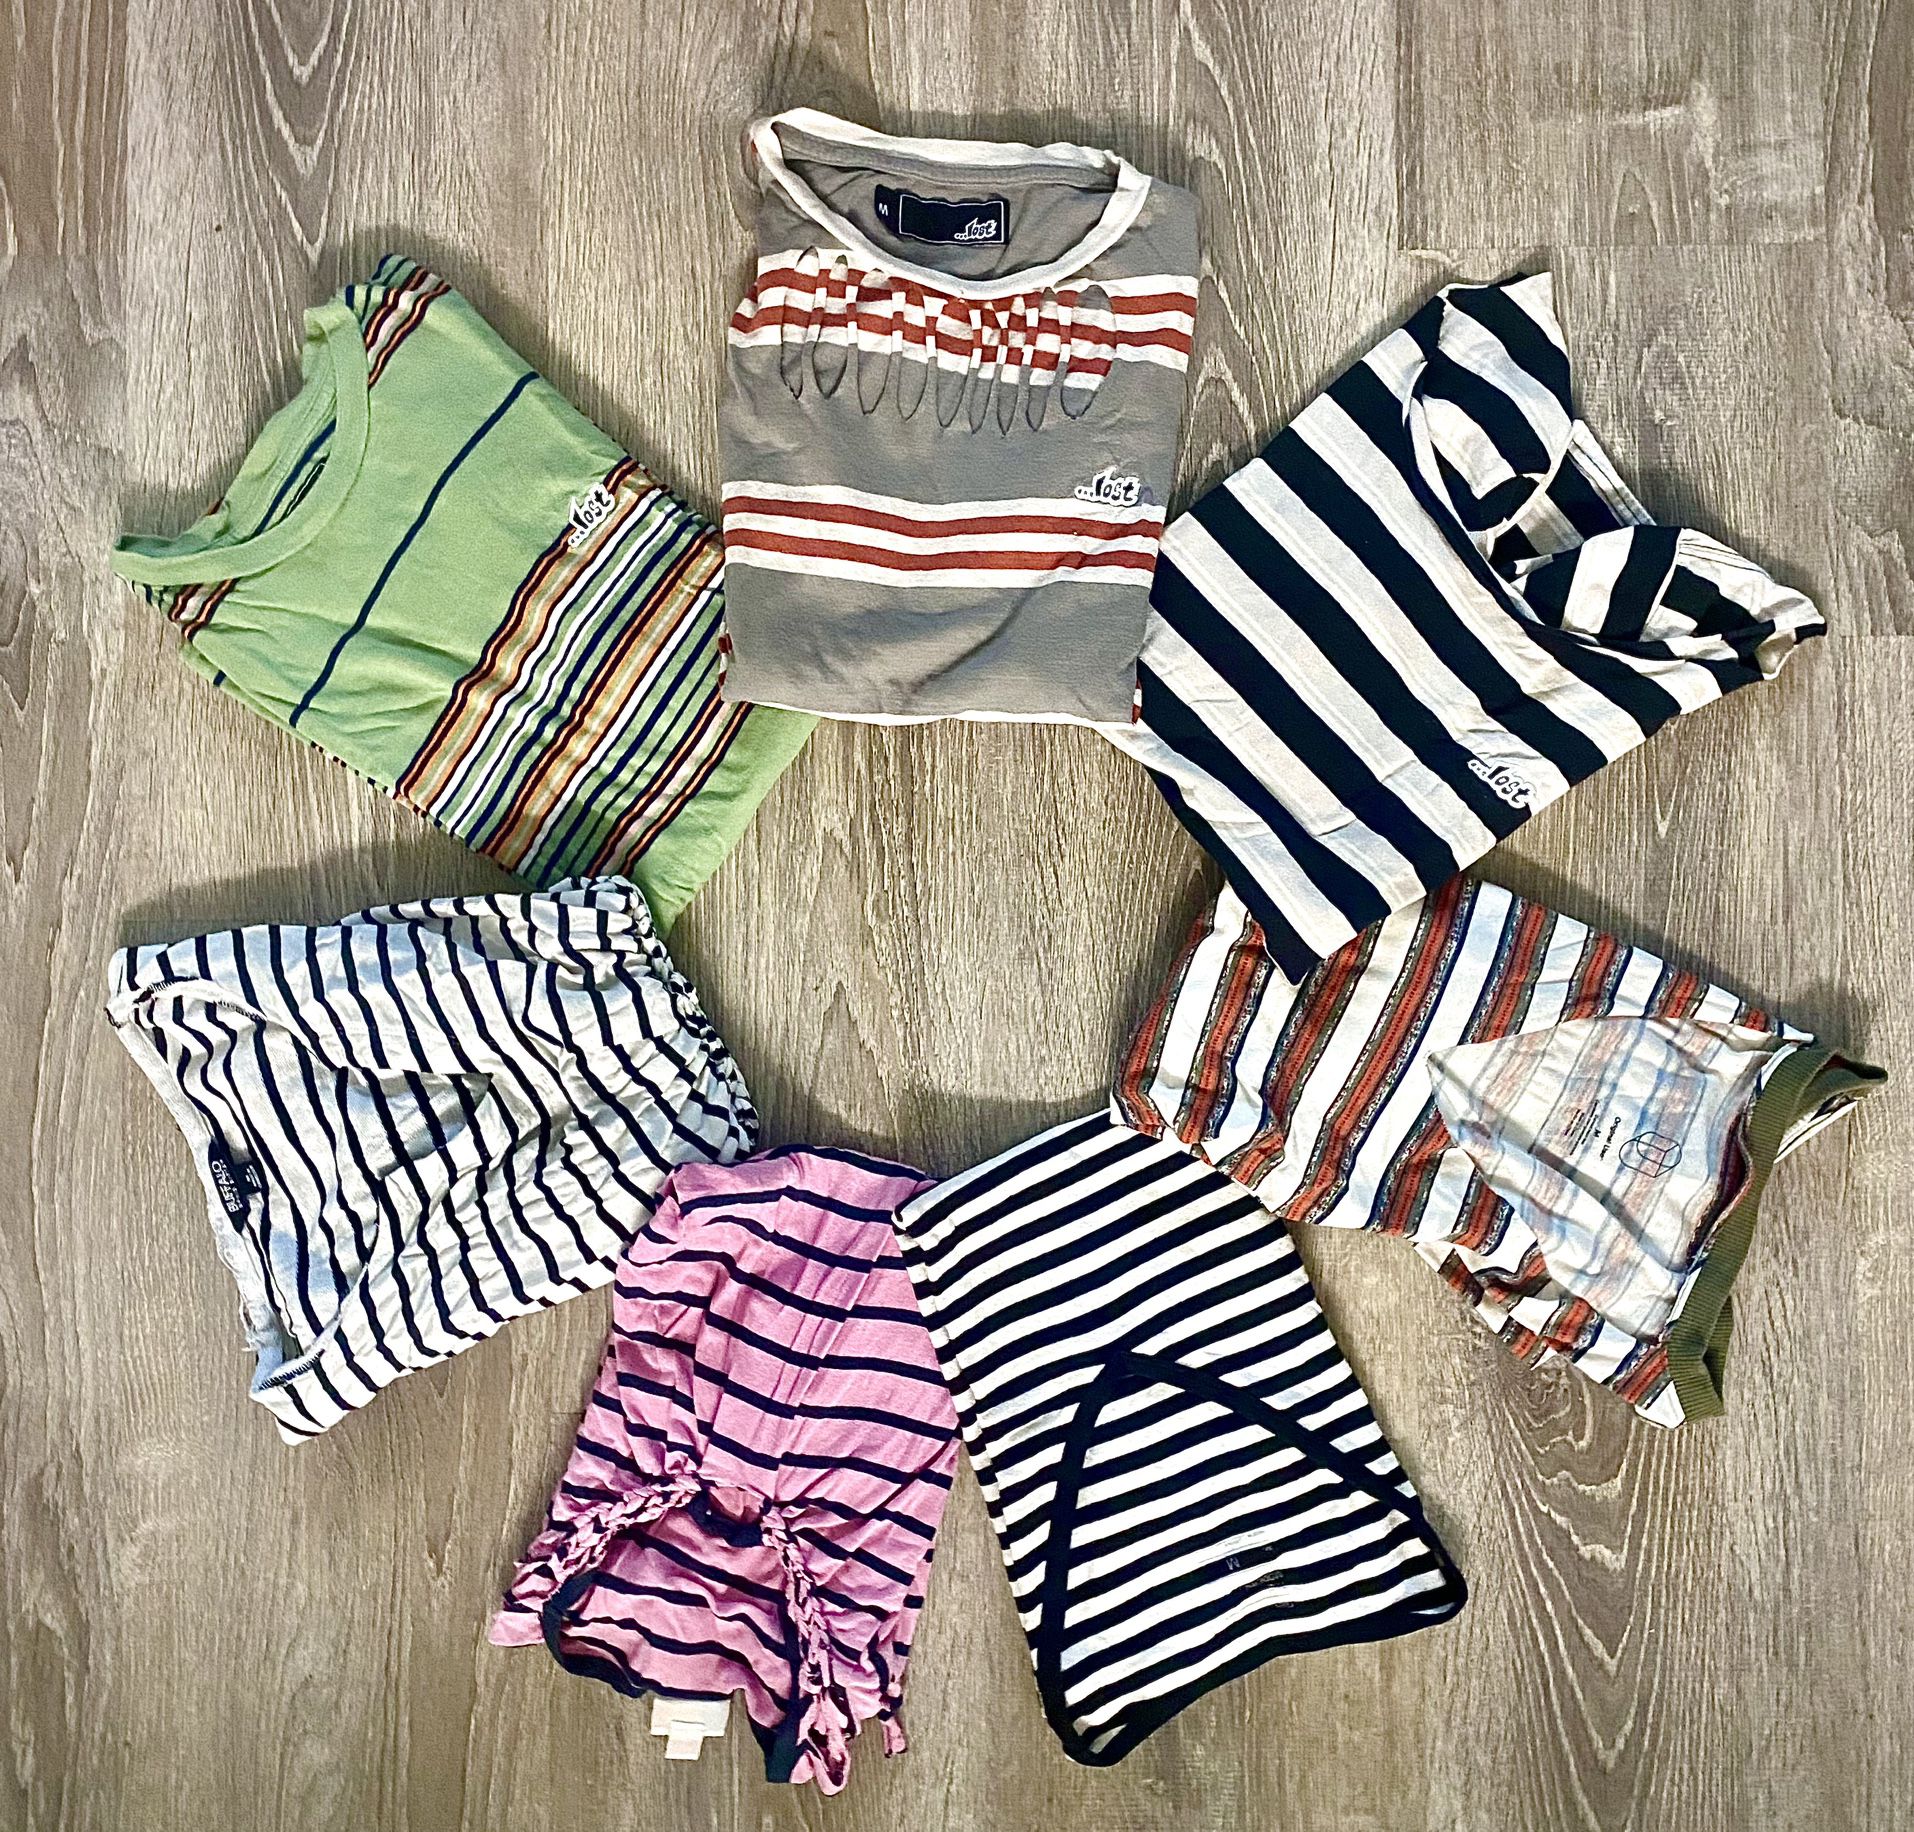 Bundle of 7 striped t-shirts: Lost, Old Navy, LulaRoe & more! S/M